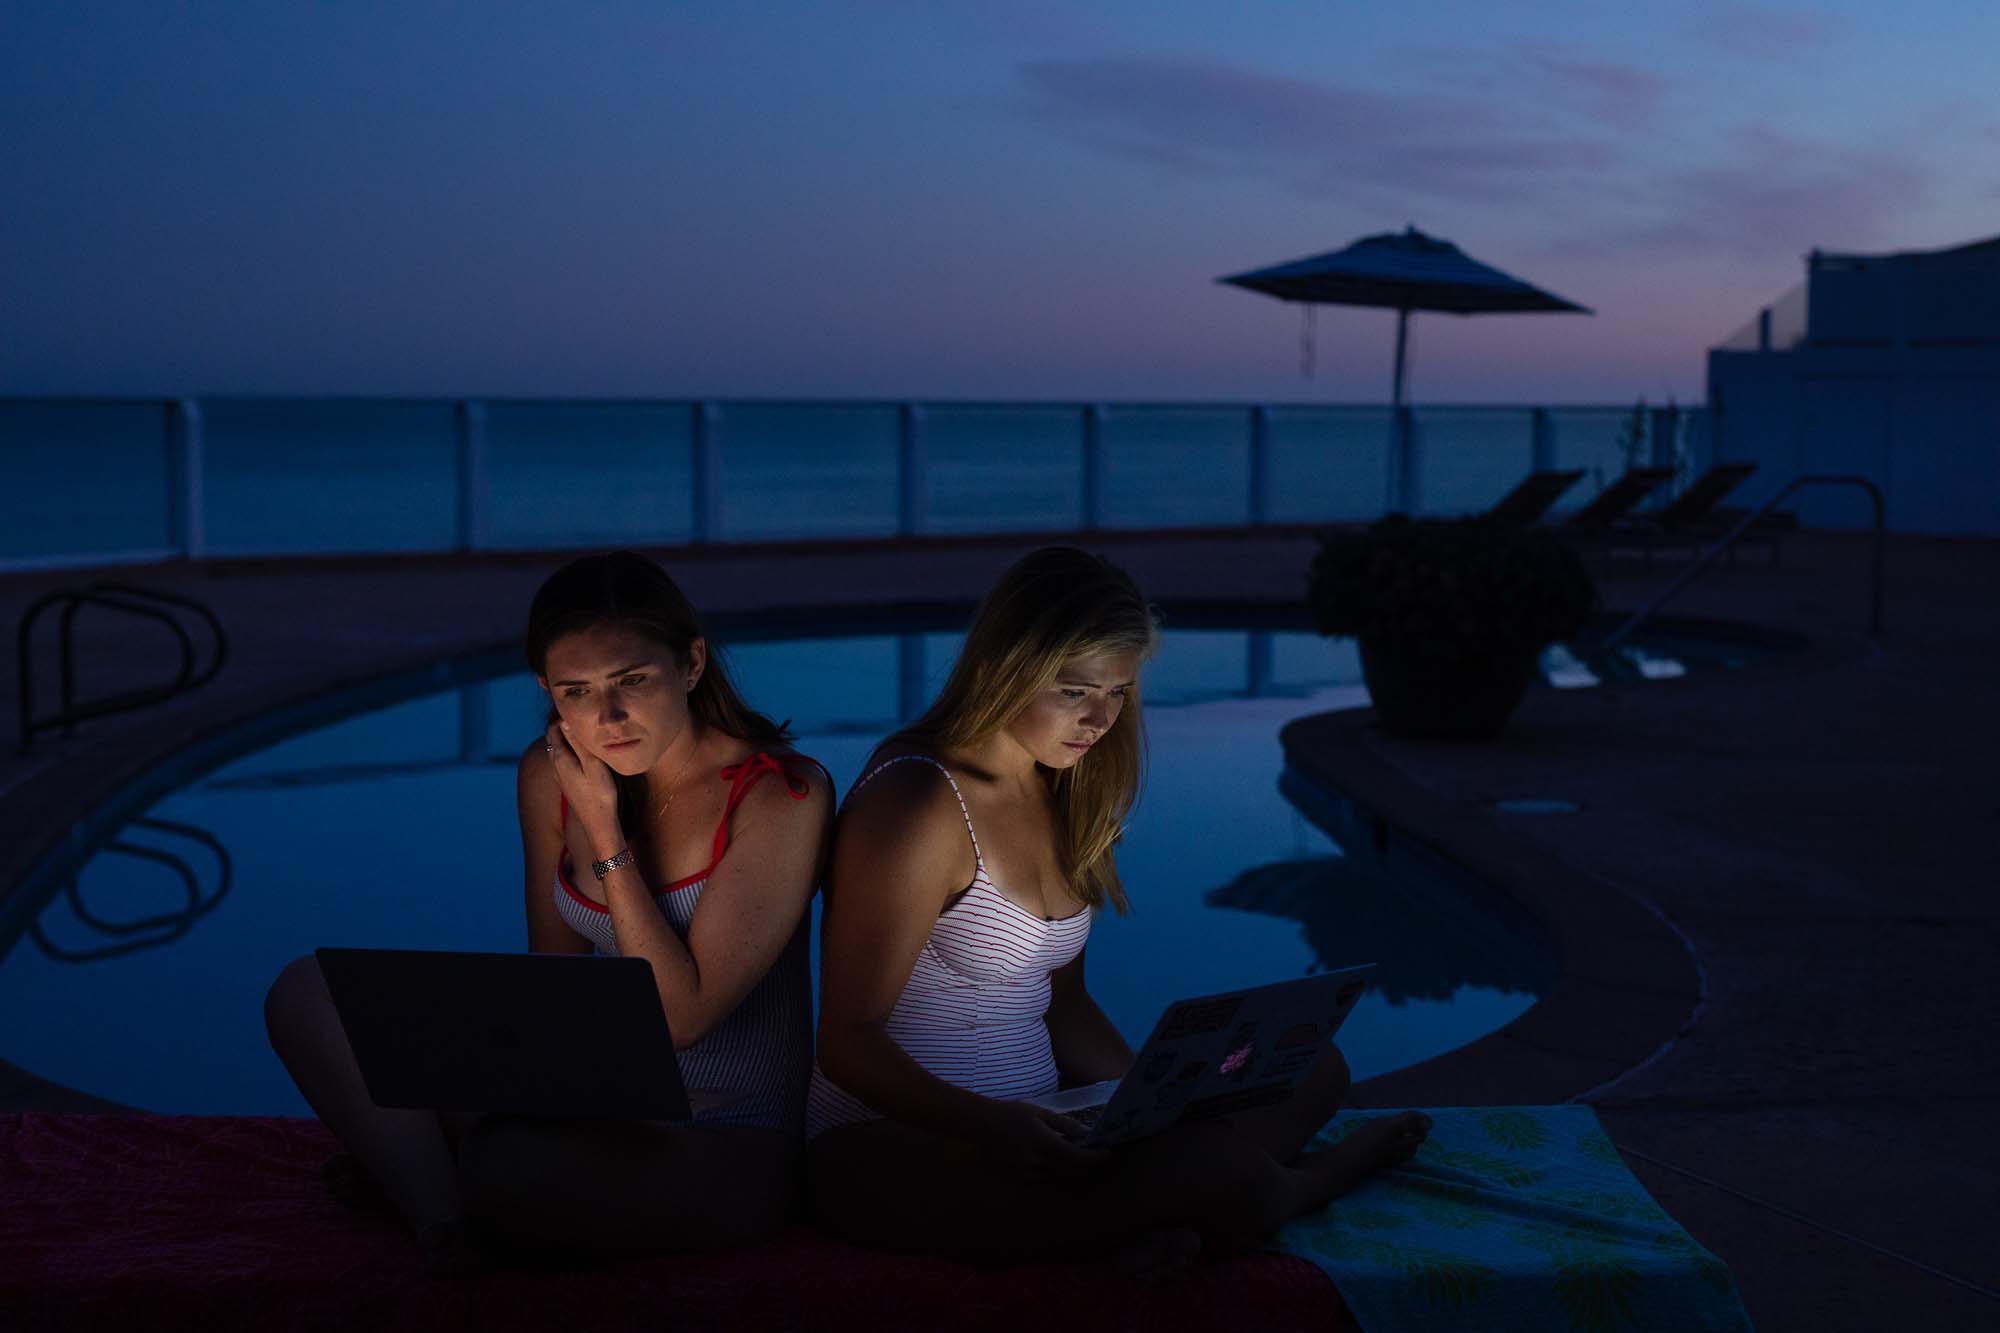 The Rener sisters are both graduating seniors: Emmy (left) from Palos Verdes High School, and Hannah (right) from Pepperdine University. They've retreated to a seaside home to make the best of the quarantine as they complete their coursework.